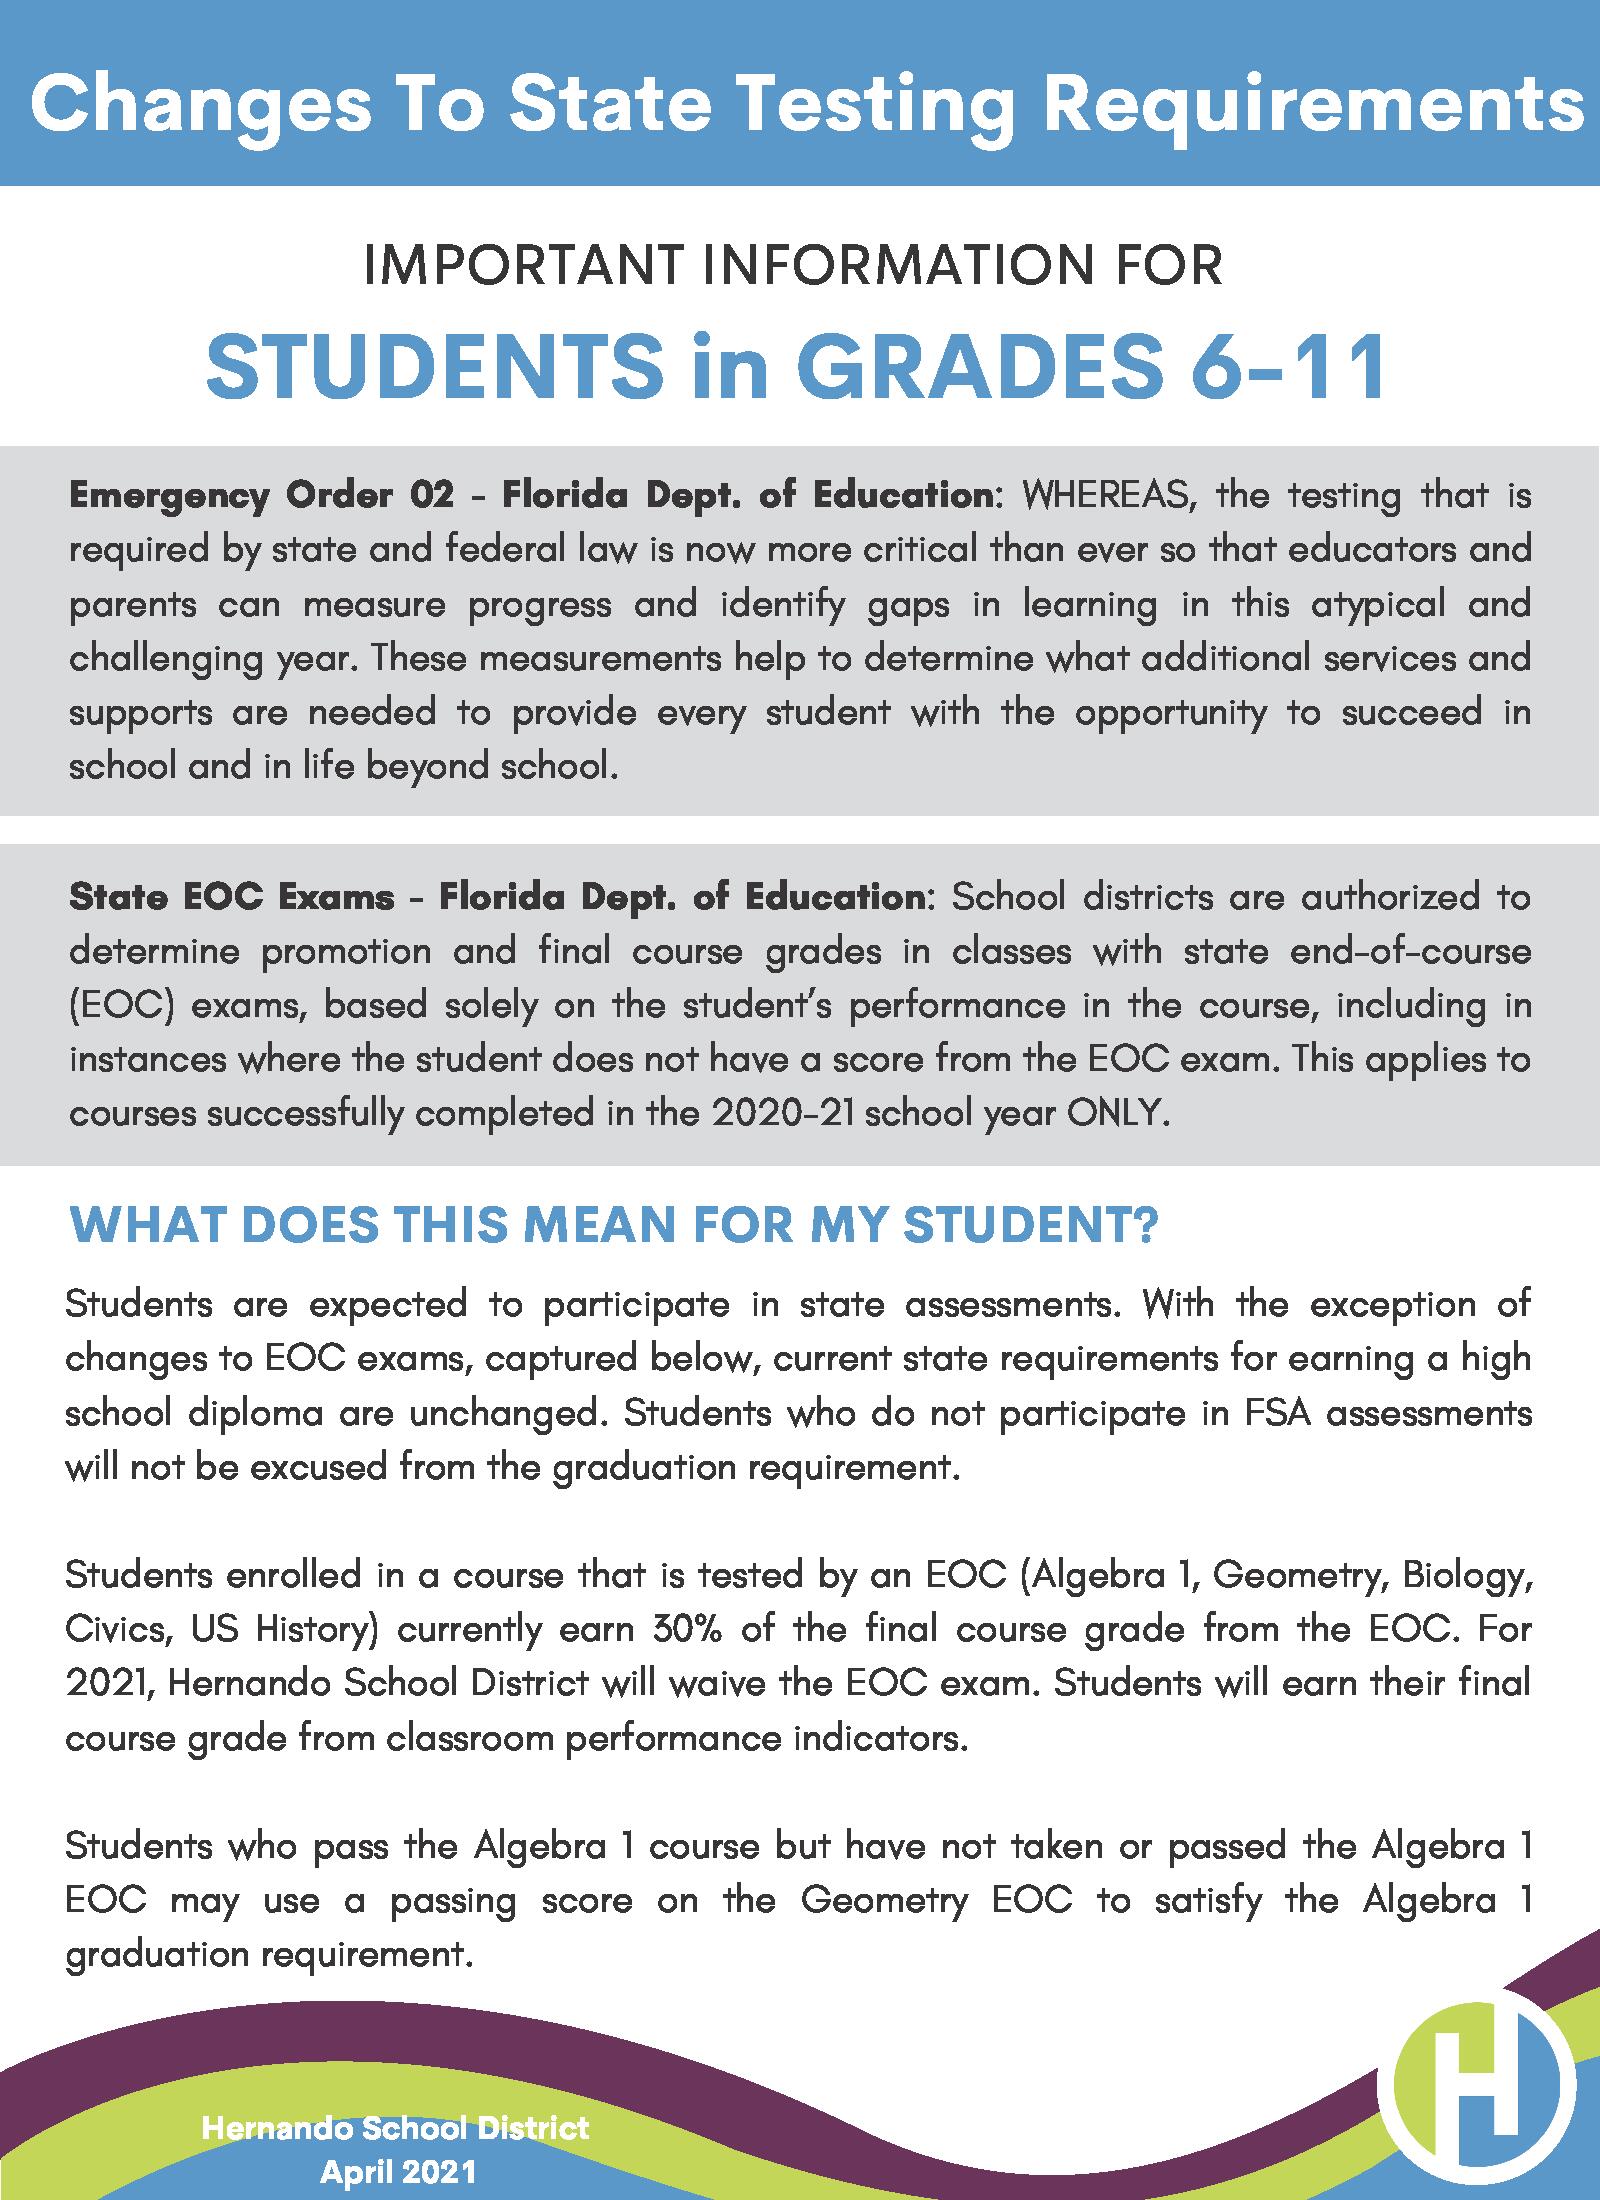 Guide to Understanding Changes to the State Testing for Grades 6-11